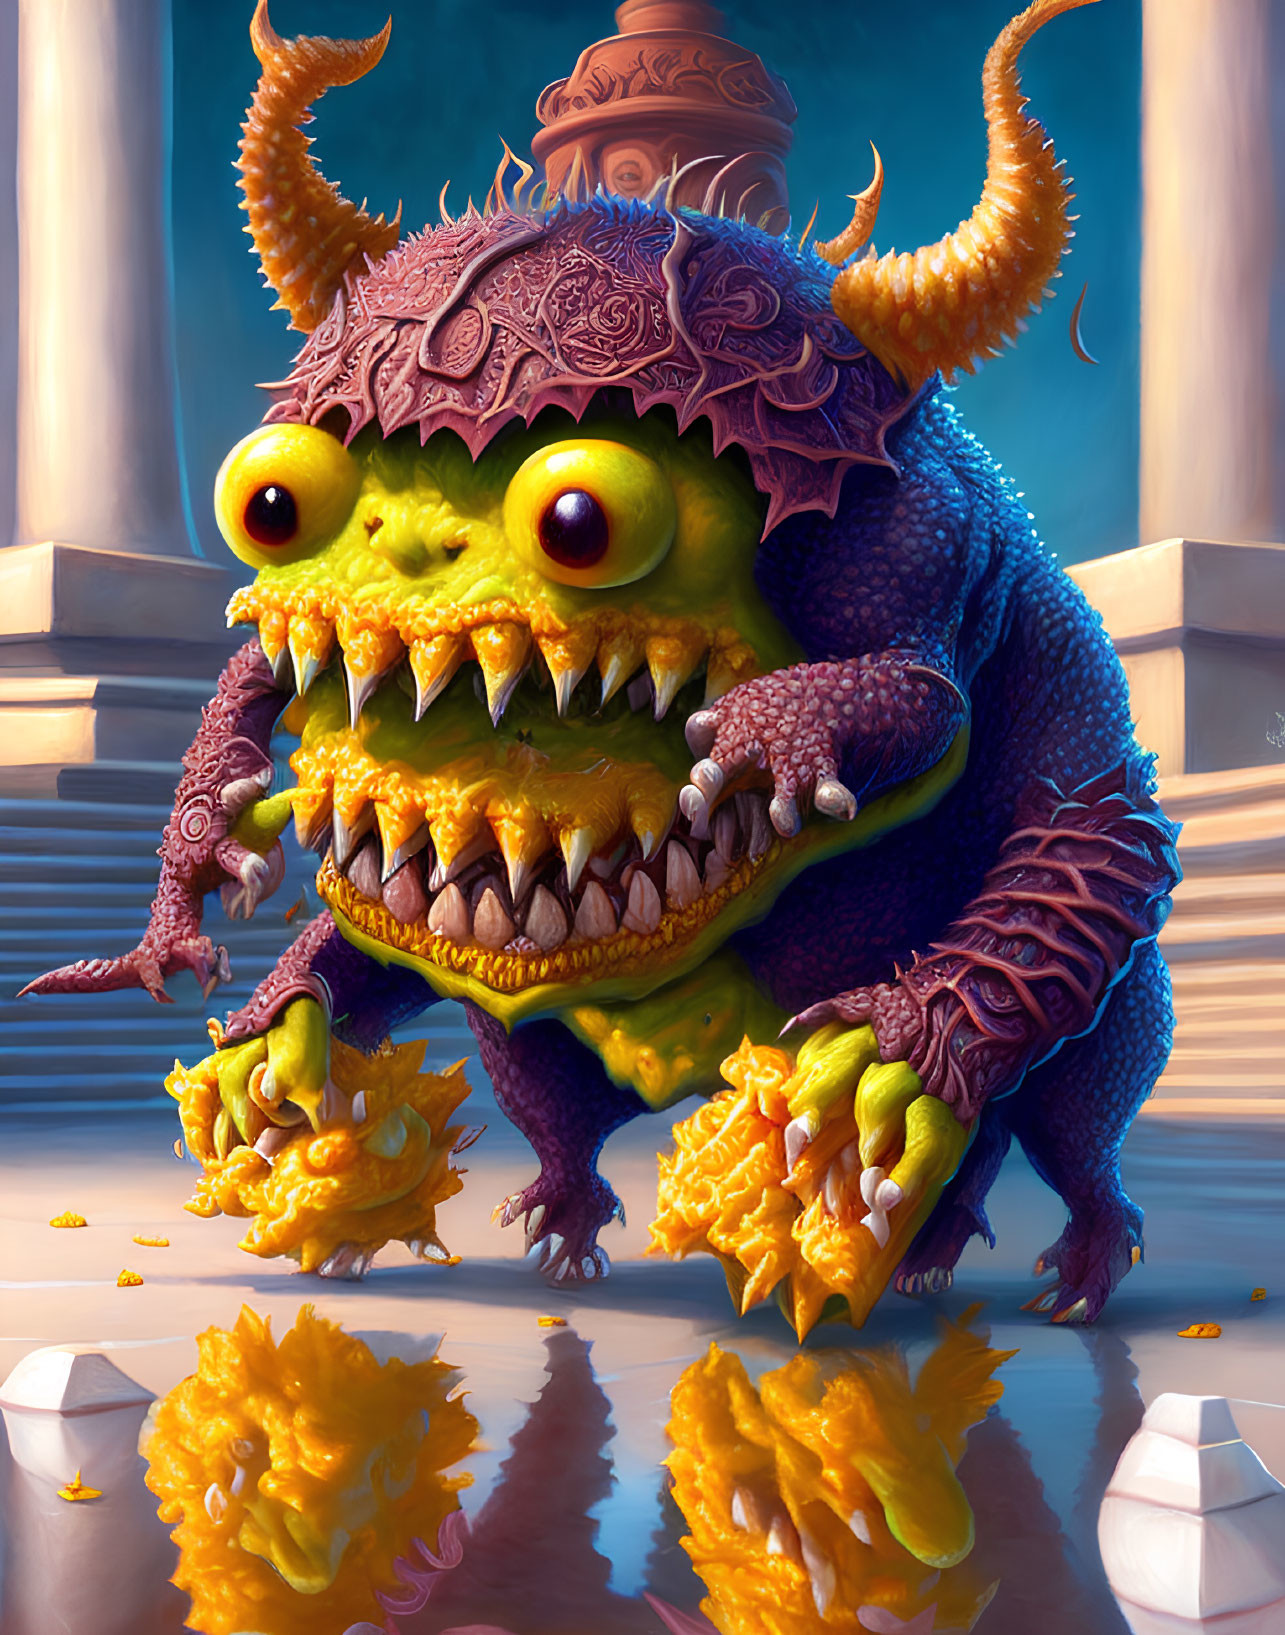 Colorful Cartoon Monster with Large Eyes and Sharp Teeth on Staircase